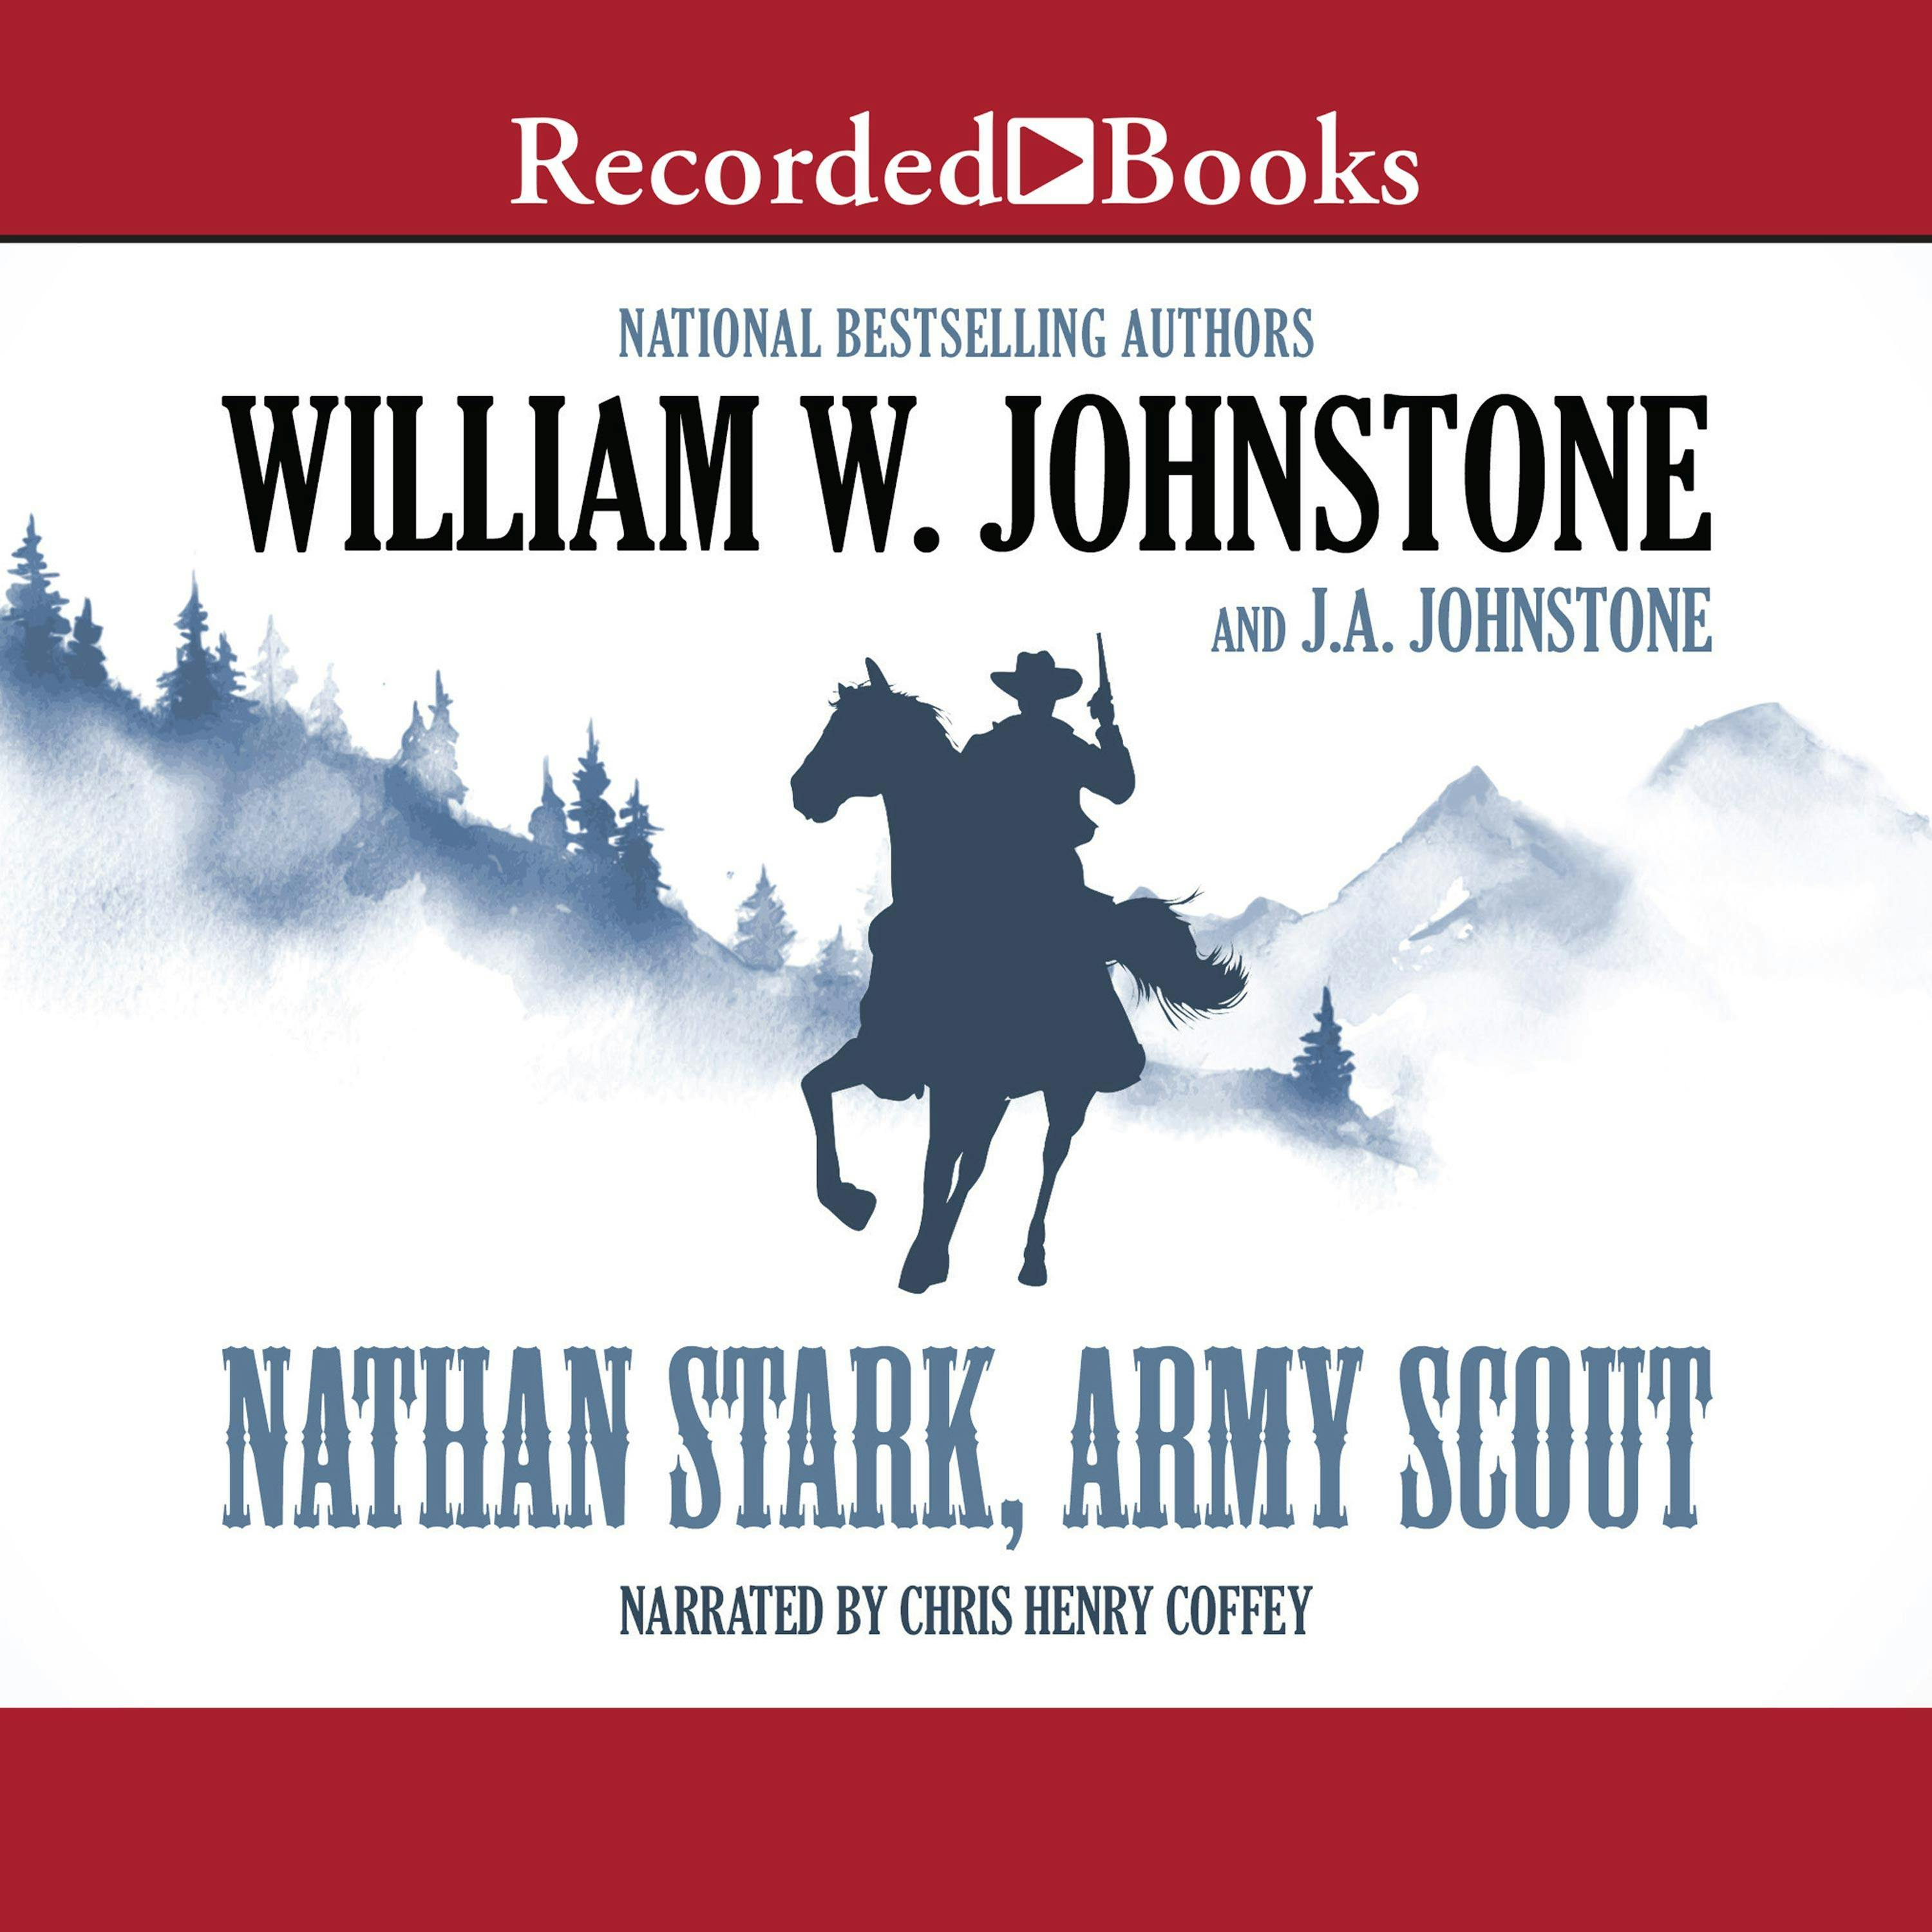 Nathan Stark, Army Scout - J.A. Johnstone, William W. Johnstone